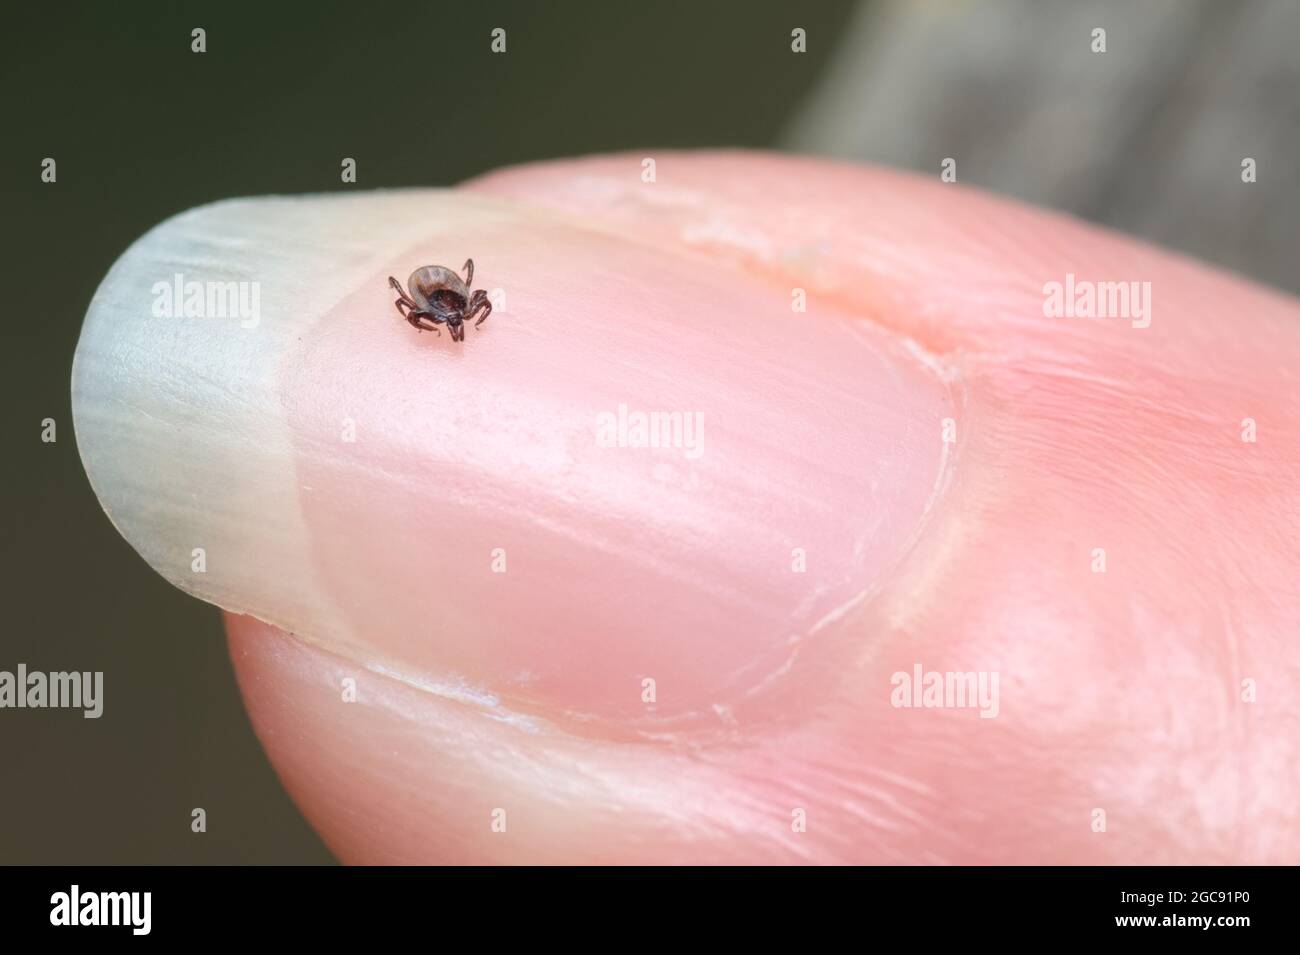 Macro Of A Tick On The Finger Nail Of A Human Hand To Show Size, Hampshire UK Stock Photo